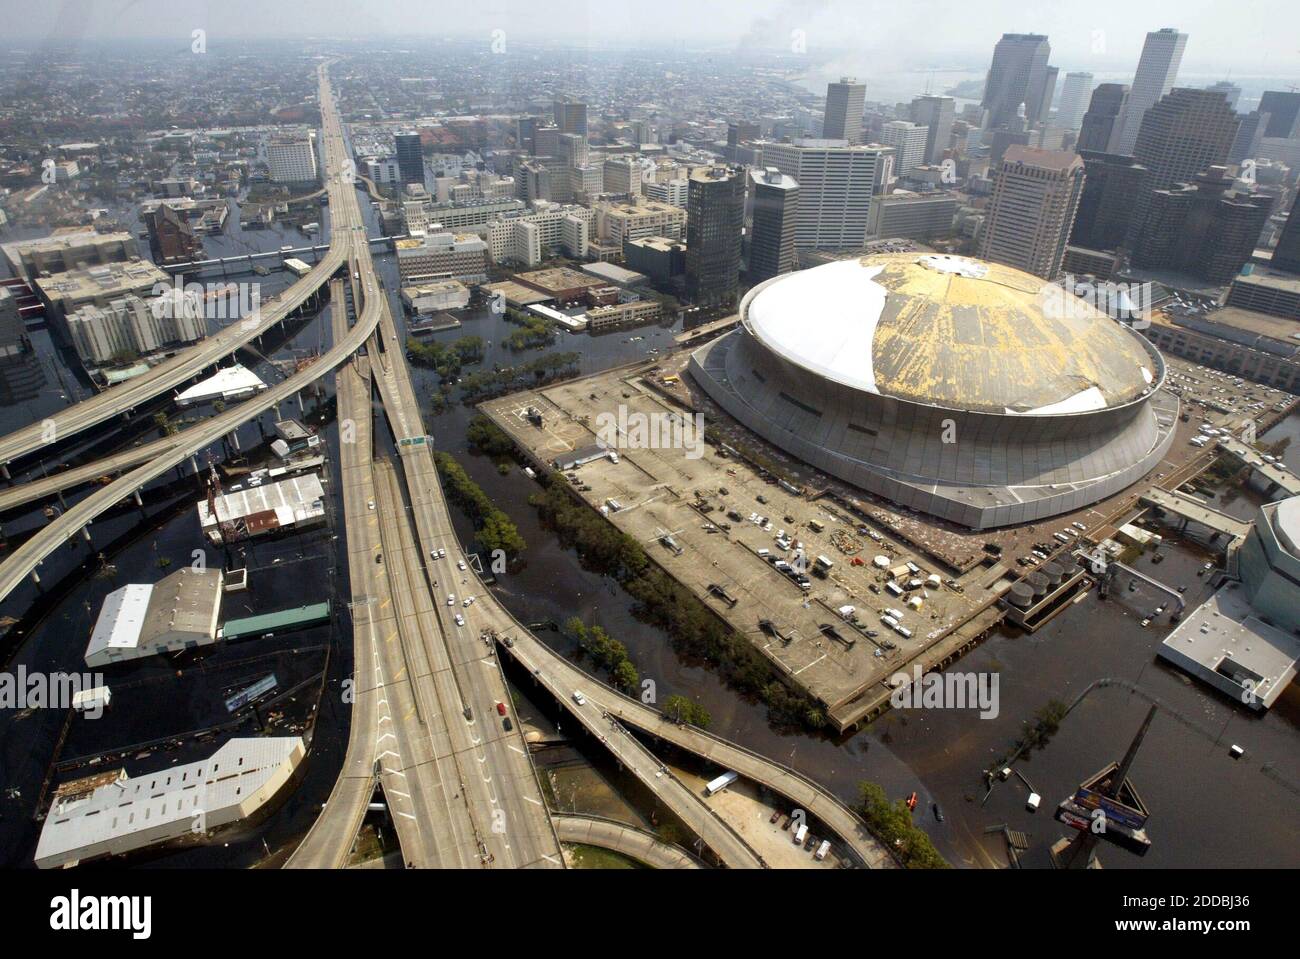 NO FILM, NO VIDEO, NO TV, NO DOCUMENTARY - The latest view Saturday, September 3, 2005, over the Superdome in New Orleans still show the massive flooding and roof damage the dome received during Hurricane Katrina. Photo by Nuri Vallbona/Miami Herald/KRT/ABACAPRESS.COM. Stock Photo